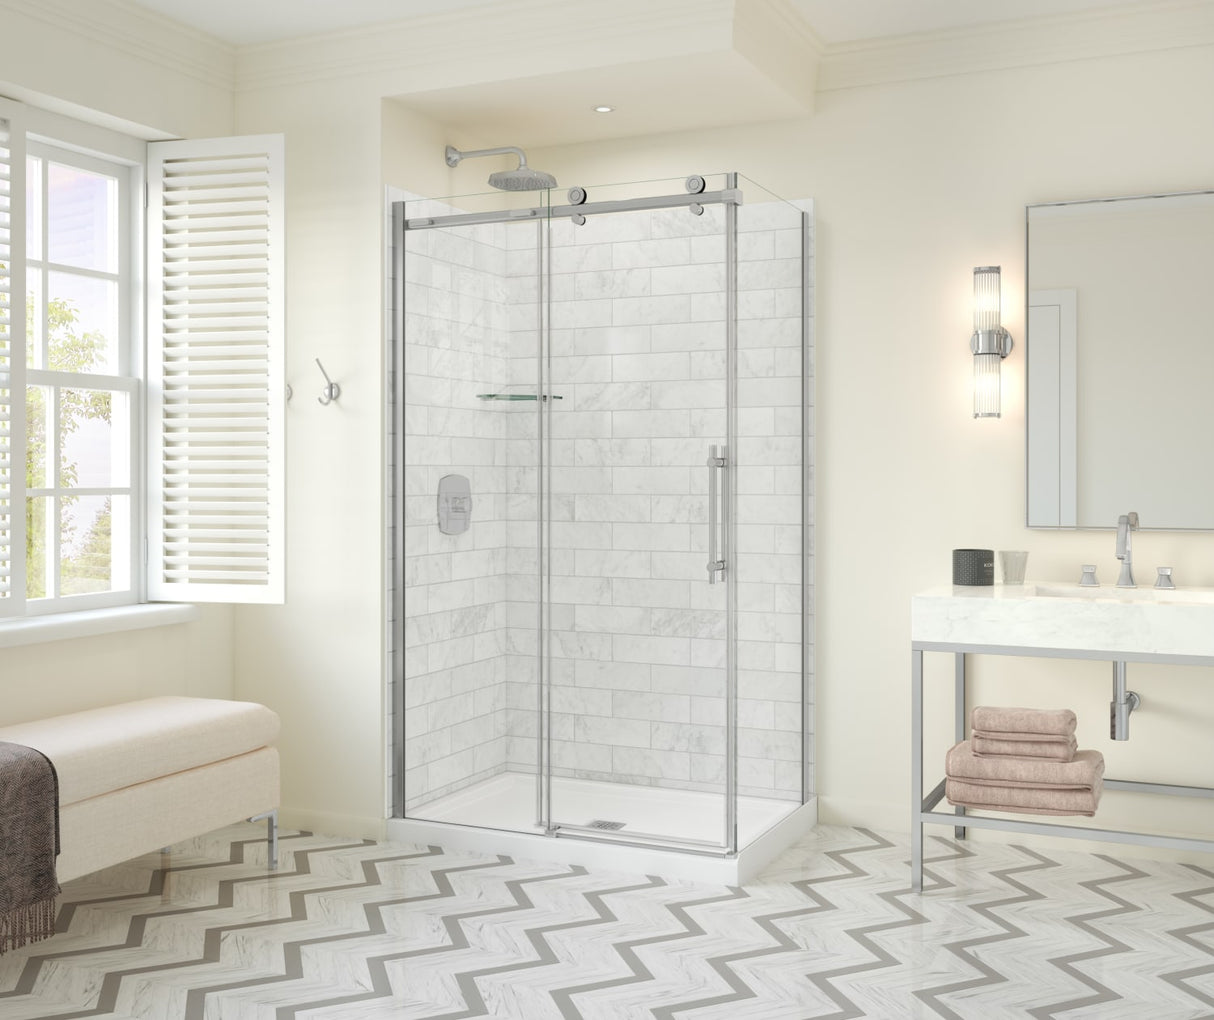 MAAX 107545-900-084-000 Odyssey SC 48" x 32" x 78" 8mm Sliding Shower Door for Corner Installation with Clear glass in Chrome